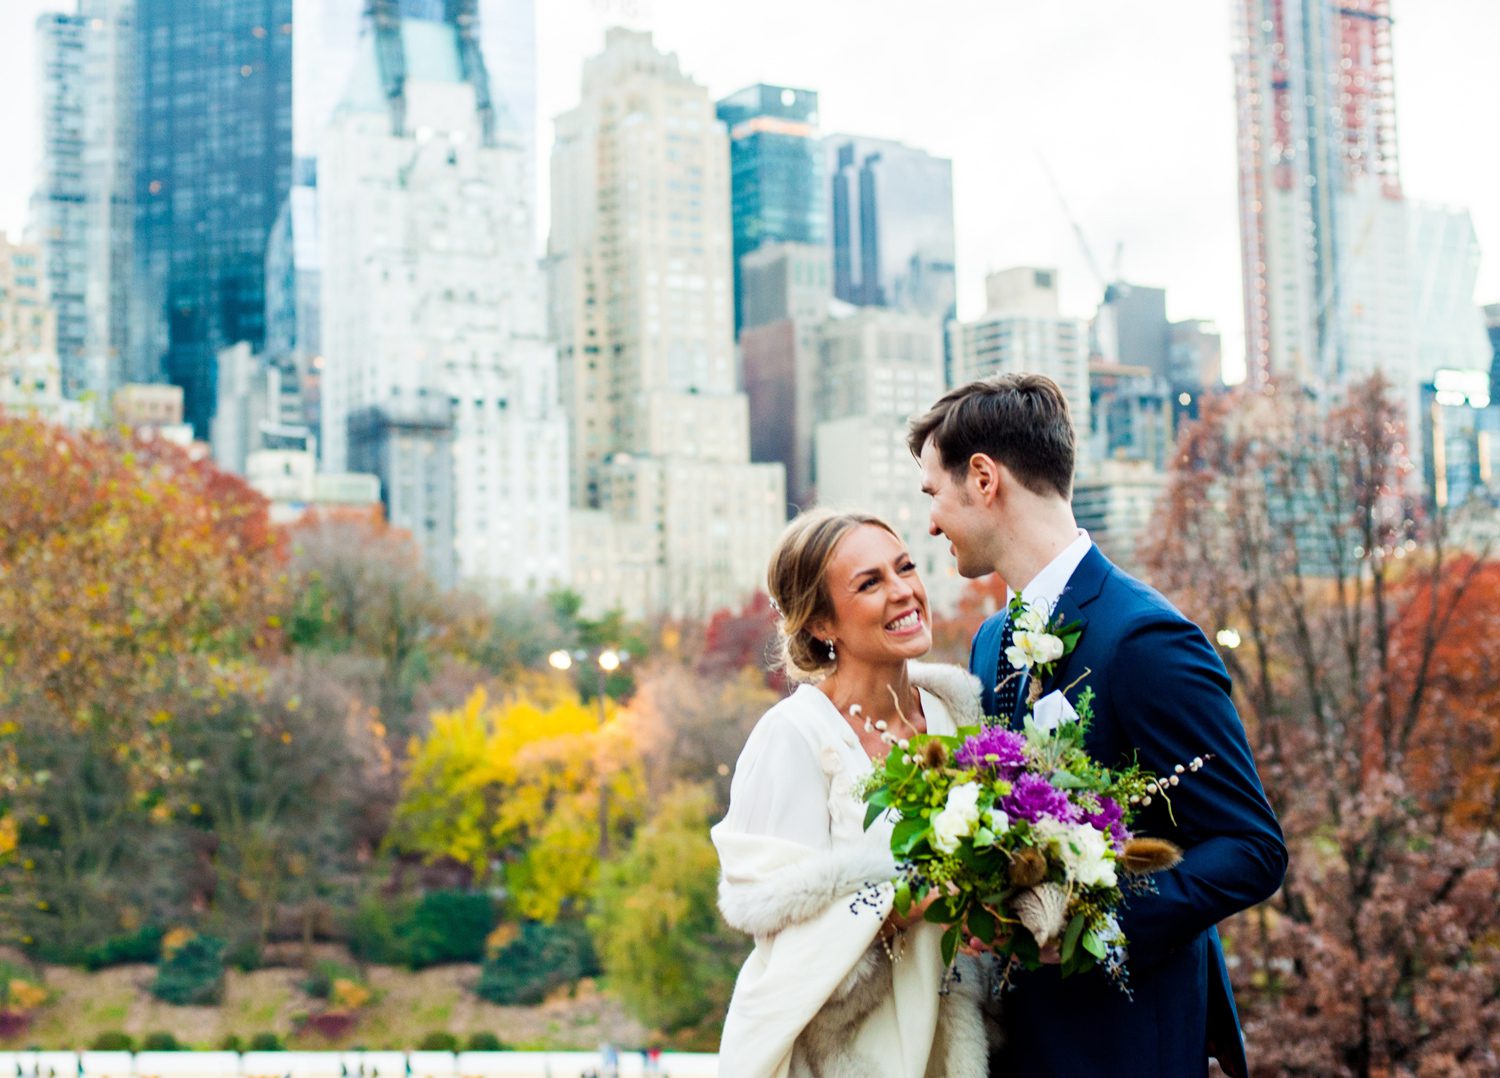 Wedding Locations in Central Park 